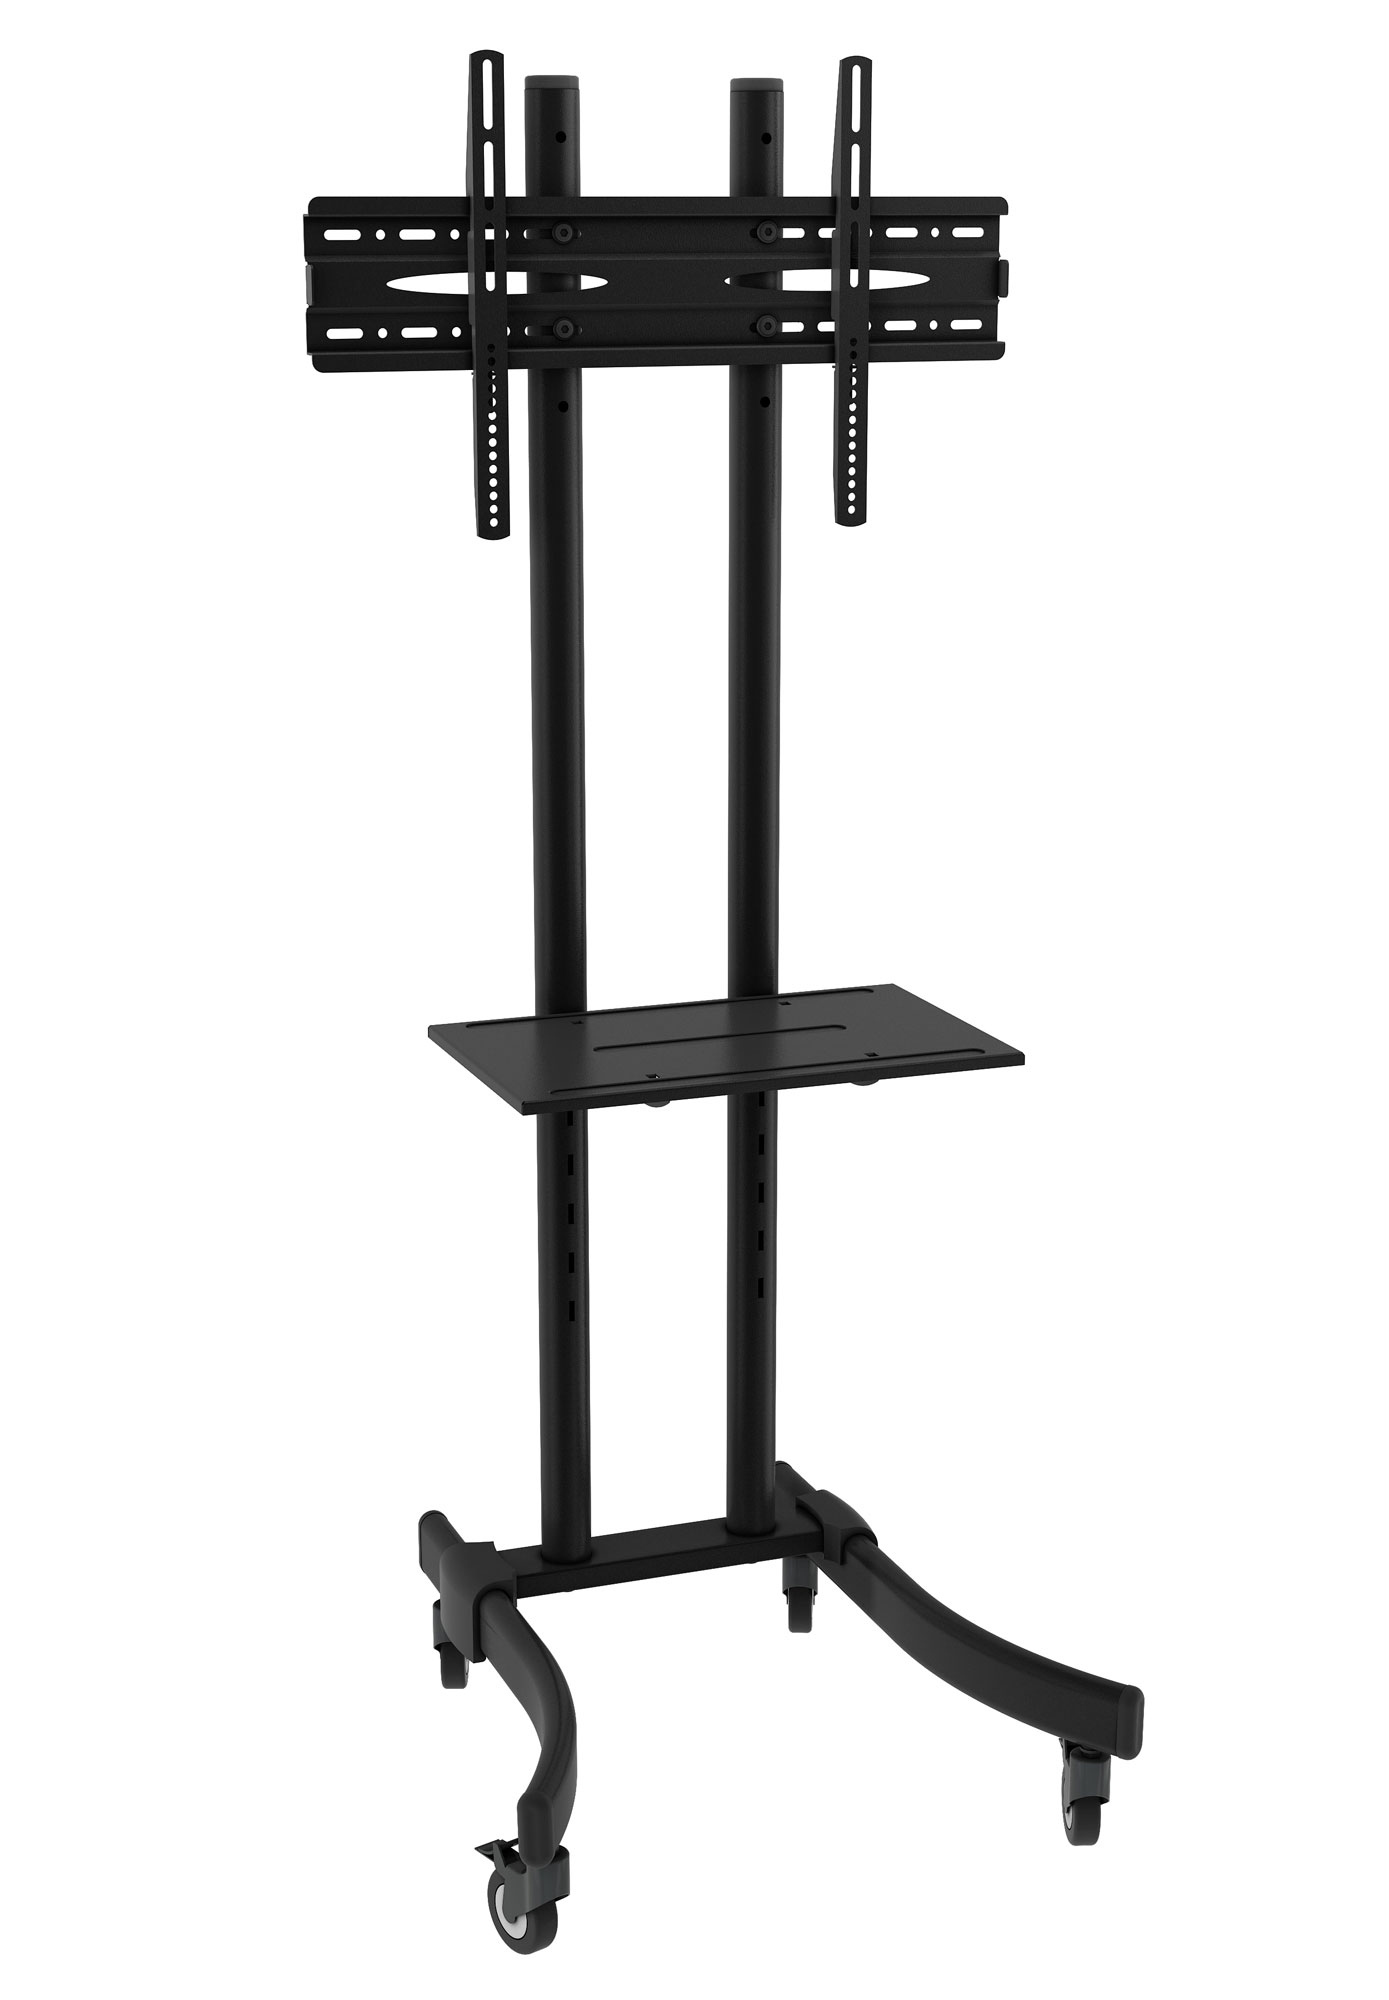 Details about   Tall Universal Mobile TV Cart TV Stand Mount /Trolley for 32-70'' TVs & Monitor 